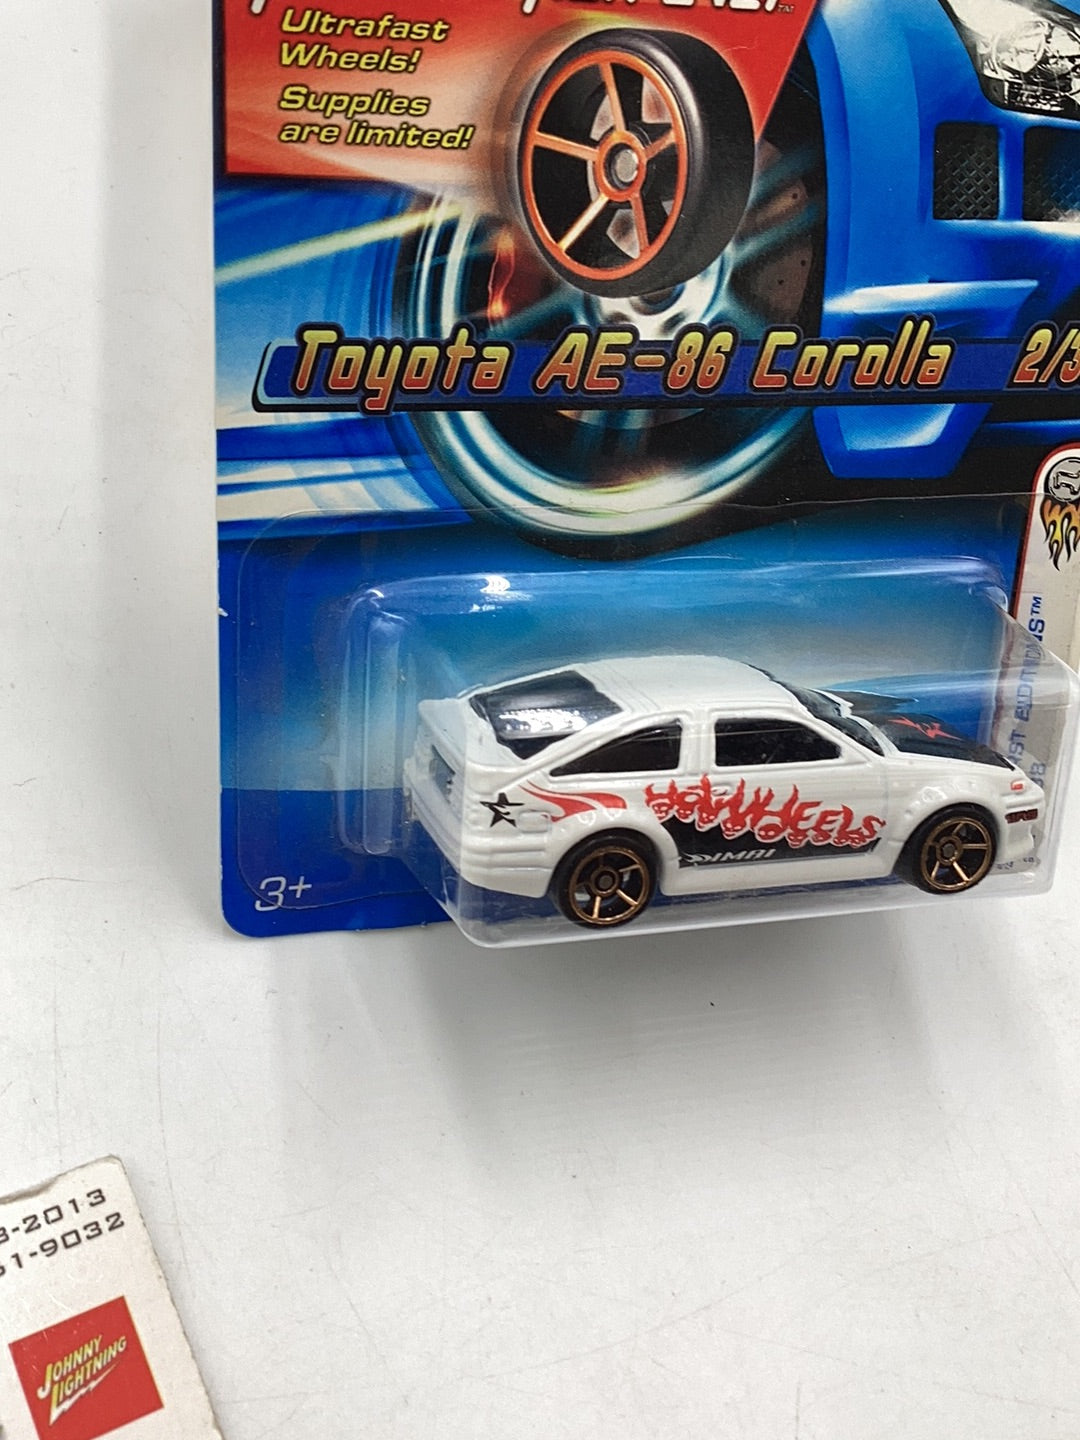 2006 hot wheels #2 Toyota AE 86 Corolla with protector